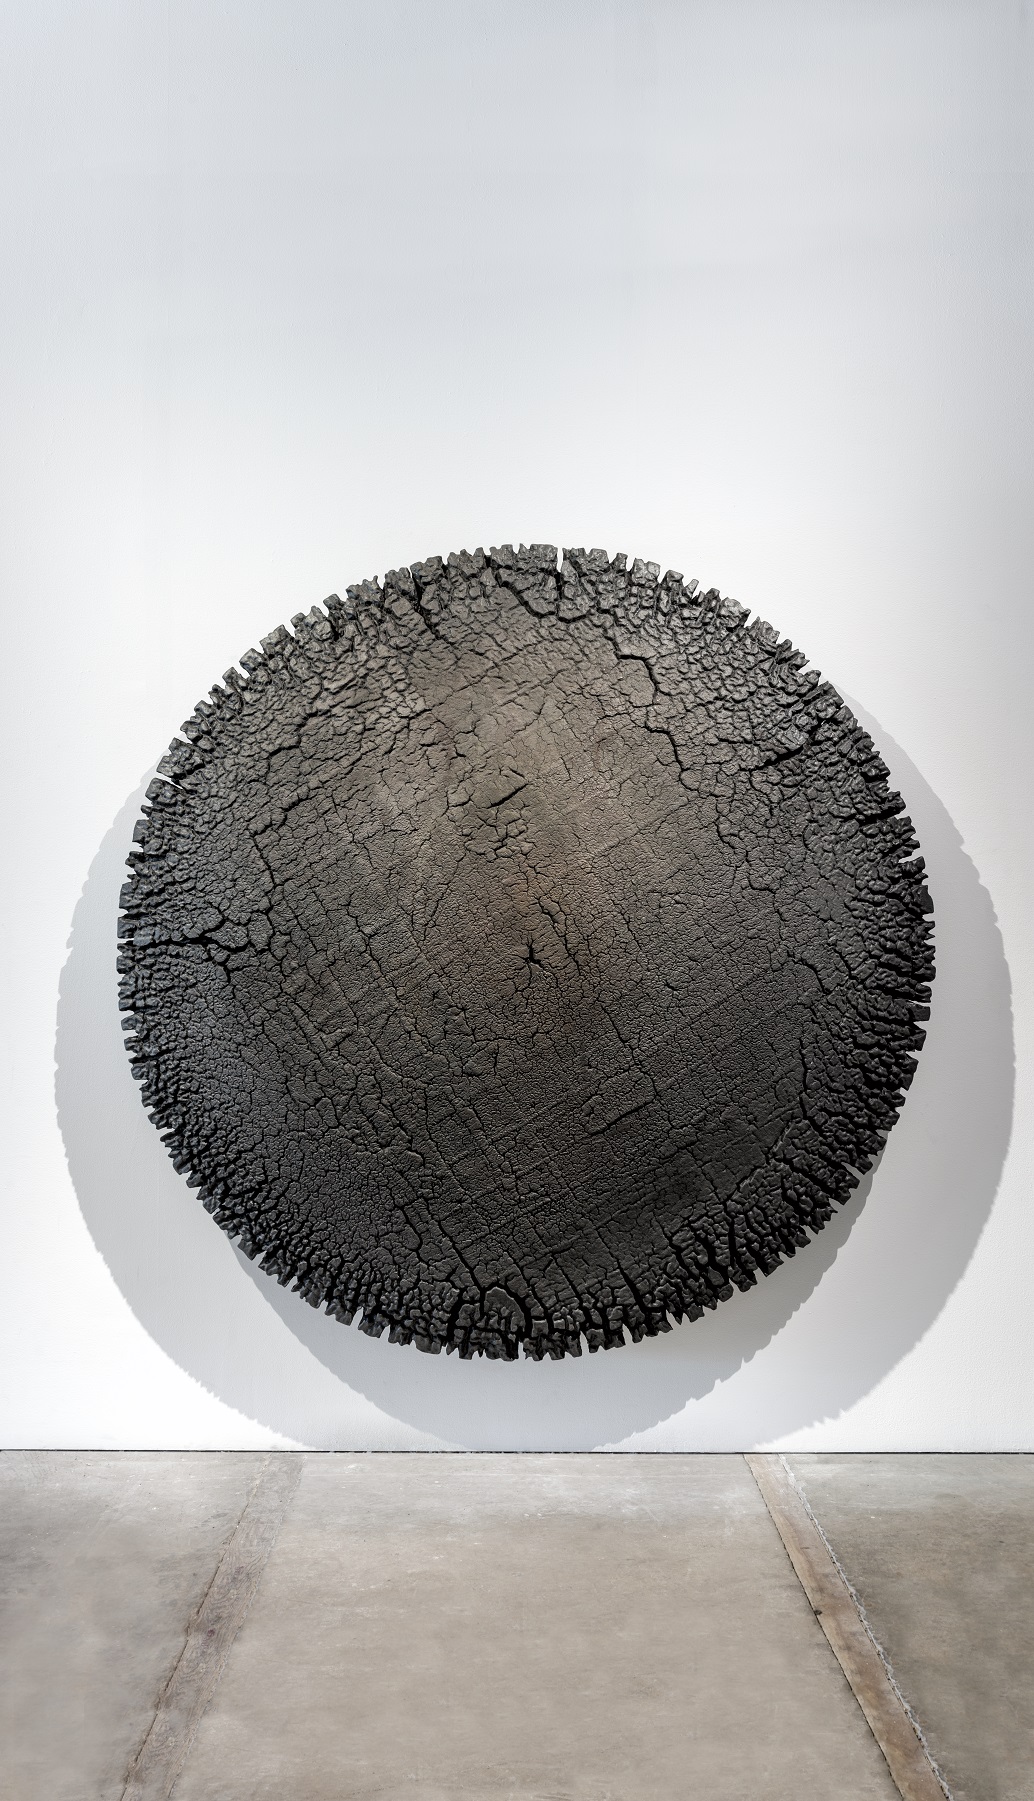 
		                					Tom Joyce		                																	
																											<i>Datum II,</i>  
																																								2017, 
																																								forged stainless steel, 
																																								80 x 80 x 4 1/4 inches (6,050 lbs) 
																								
		                				